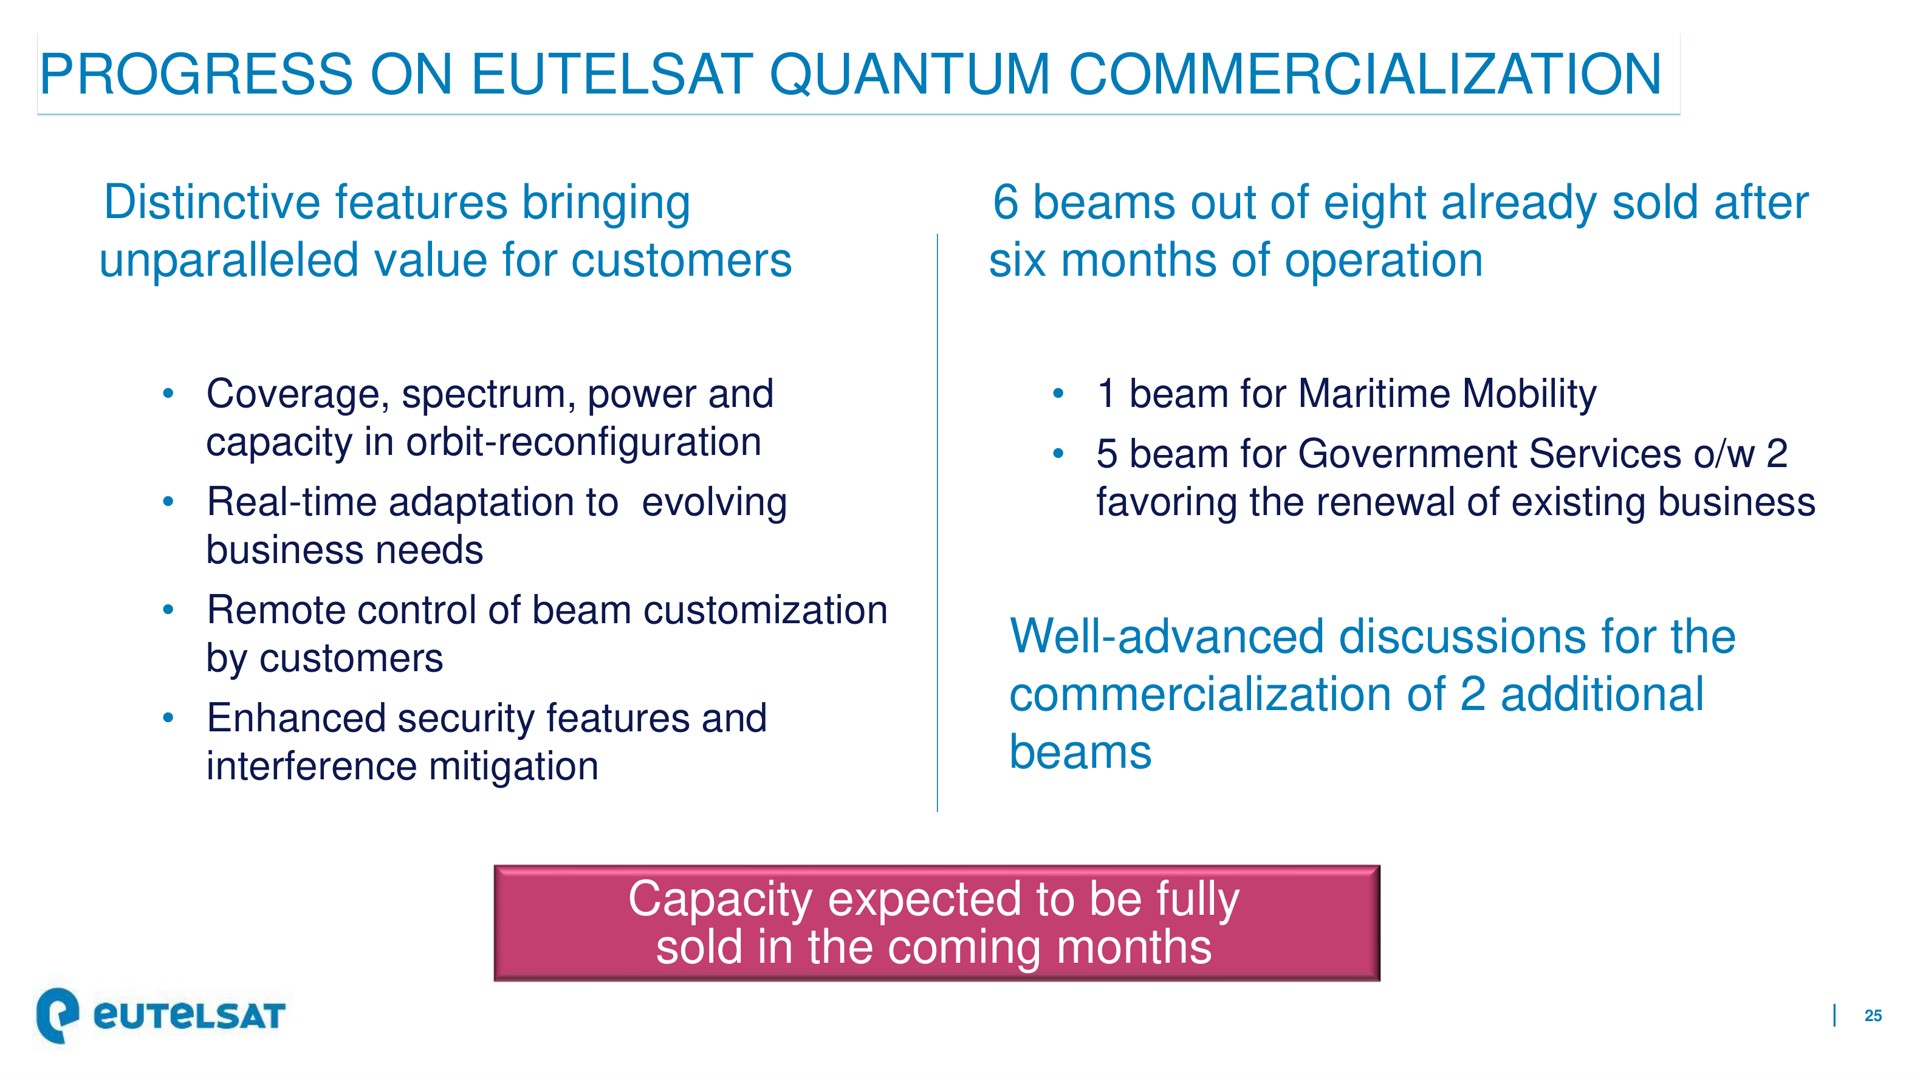 progress on quantum commercialization distinctive features bringing unparalleled value for customers beams out of eight already sold after six months of operation well advanced discussions for the commercialization of additional beams capacity expected to be fully sold in the coming months orbit beam government services enhanced security and interference mitigation | Eutelsat